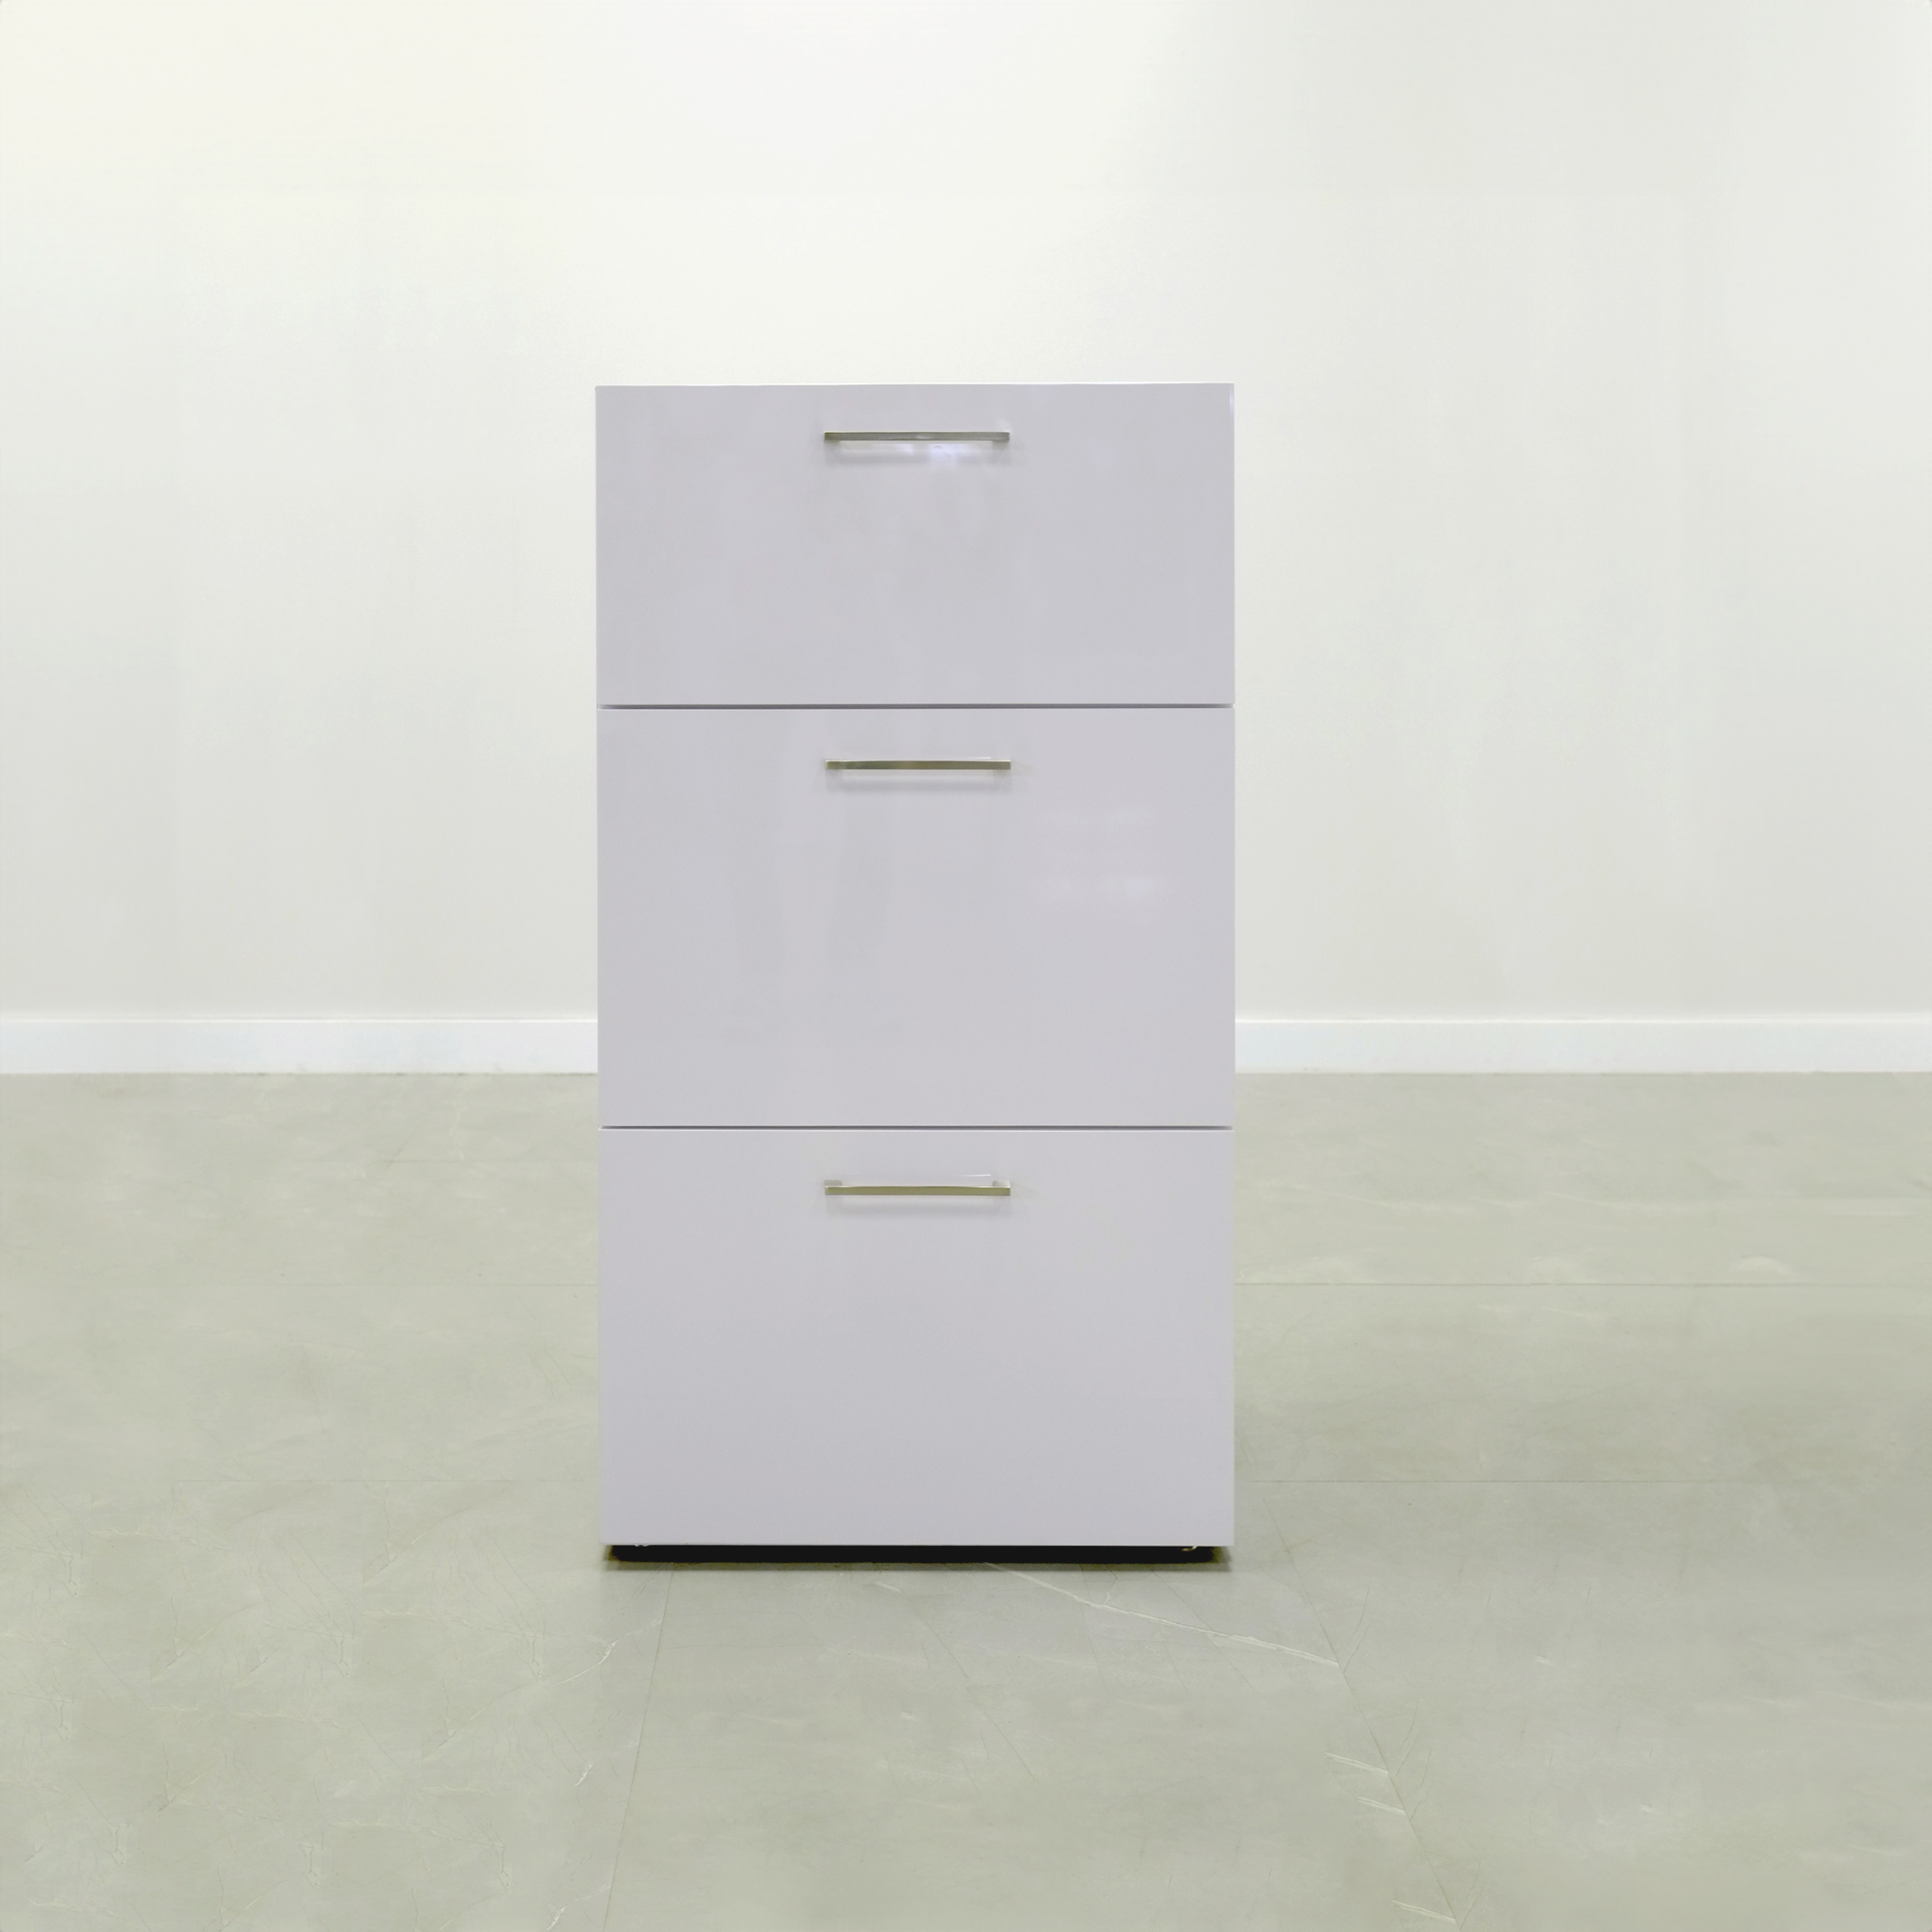 Naples Lateral File Cabinet in white gloss laminate, shown here.